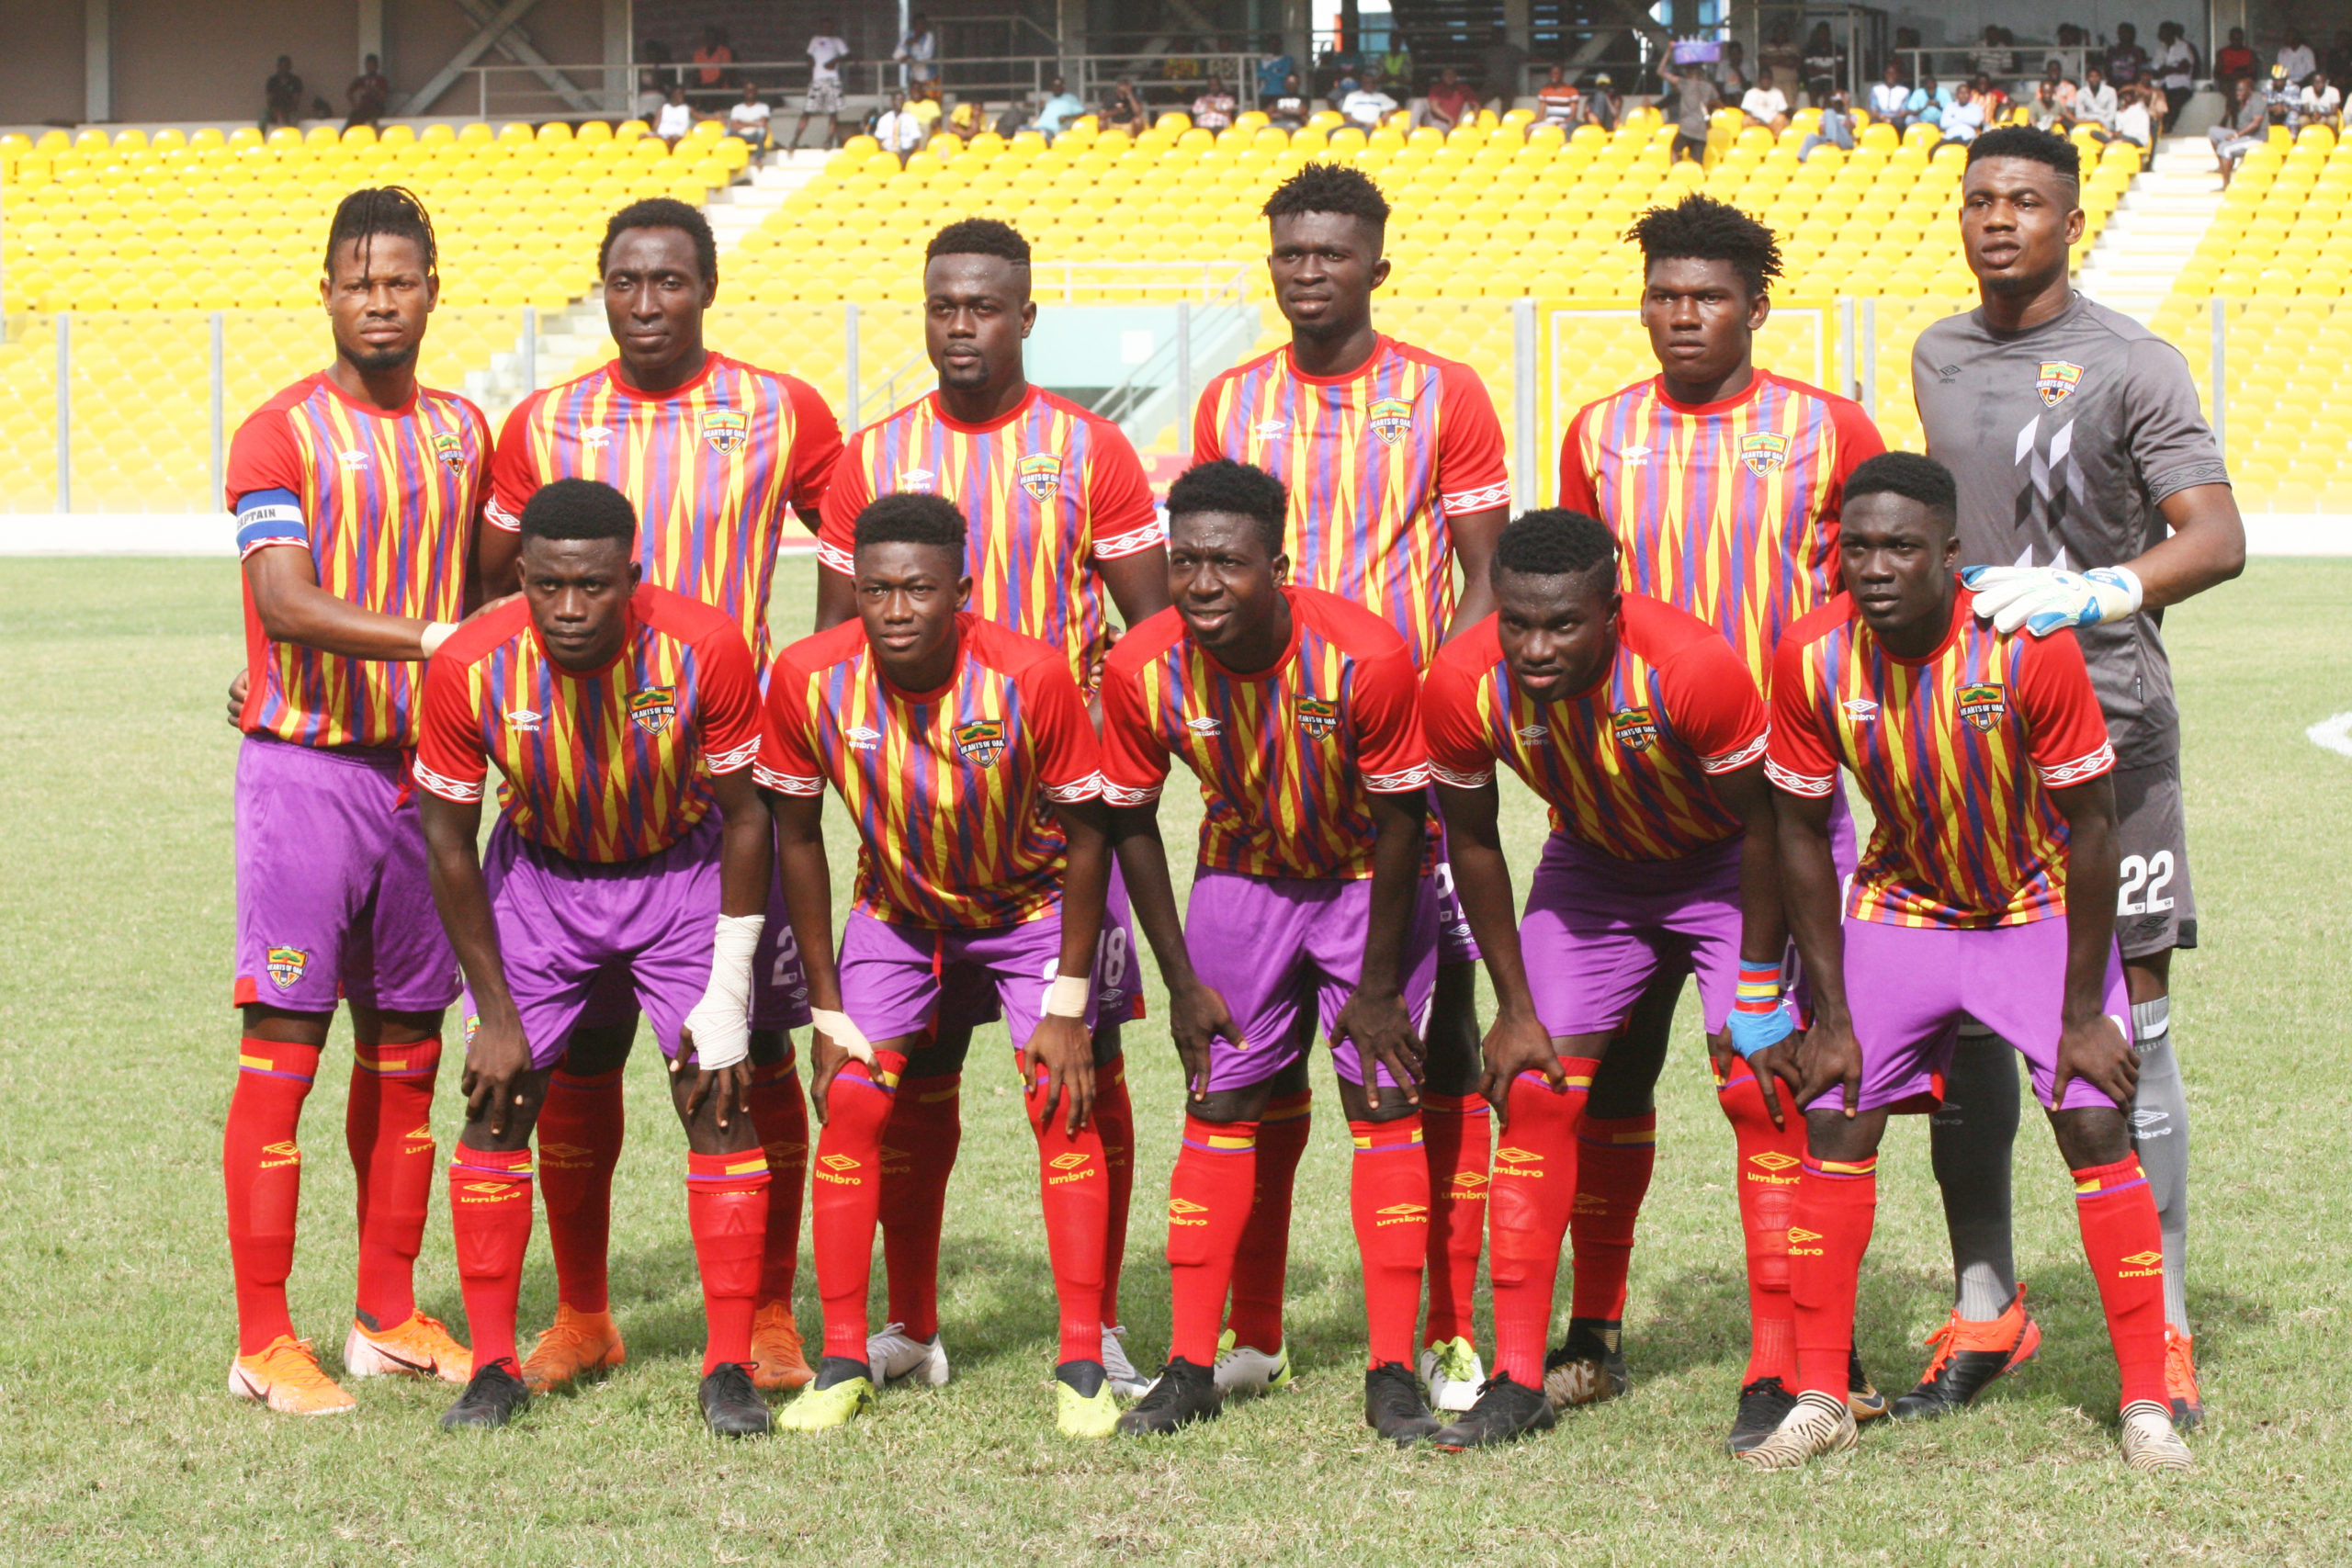 HEARTS OF OAK OFFICIALLY CROWNED CHAMPIONS